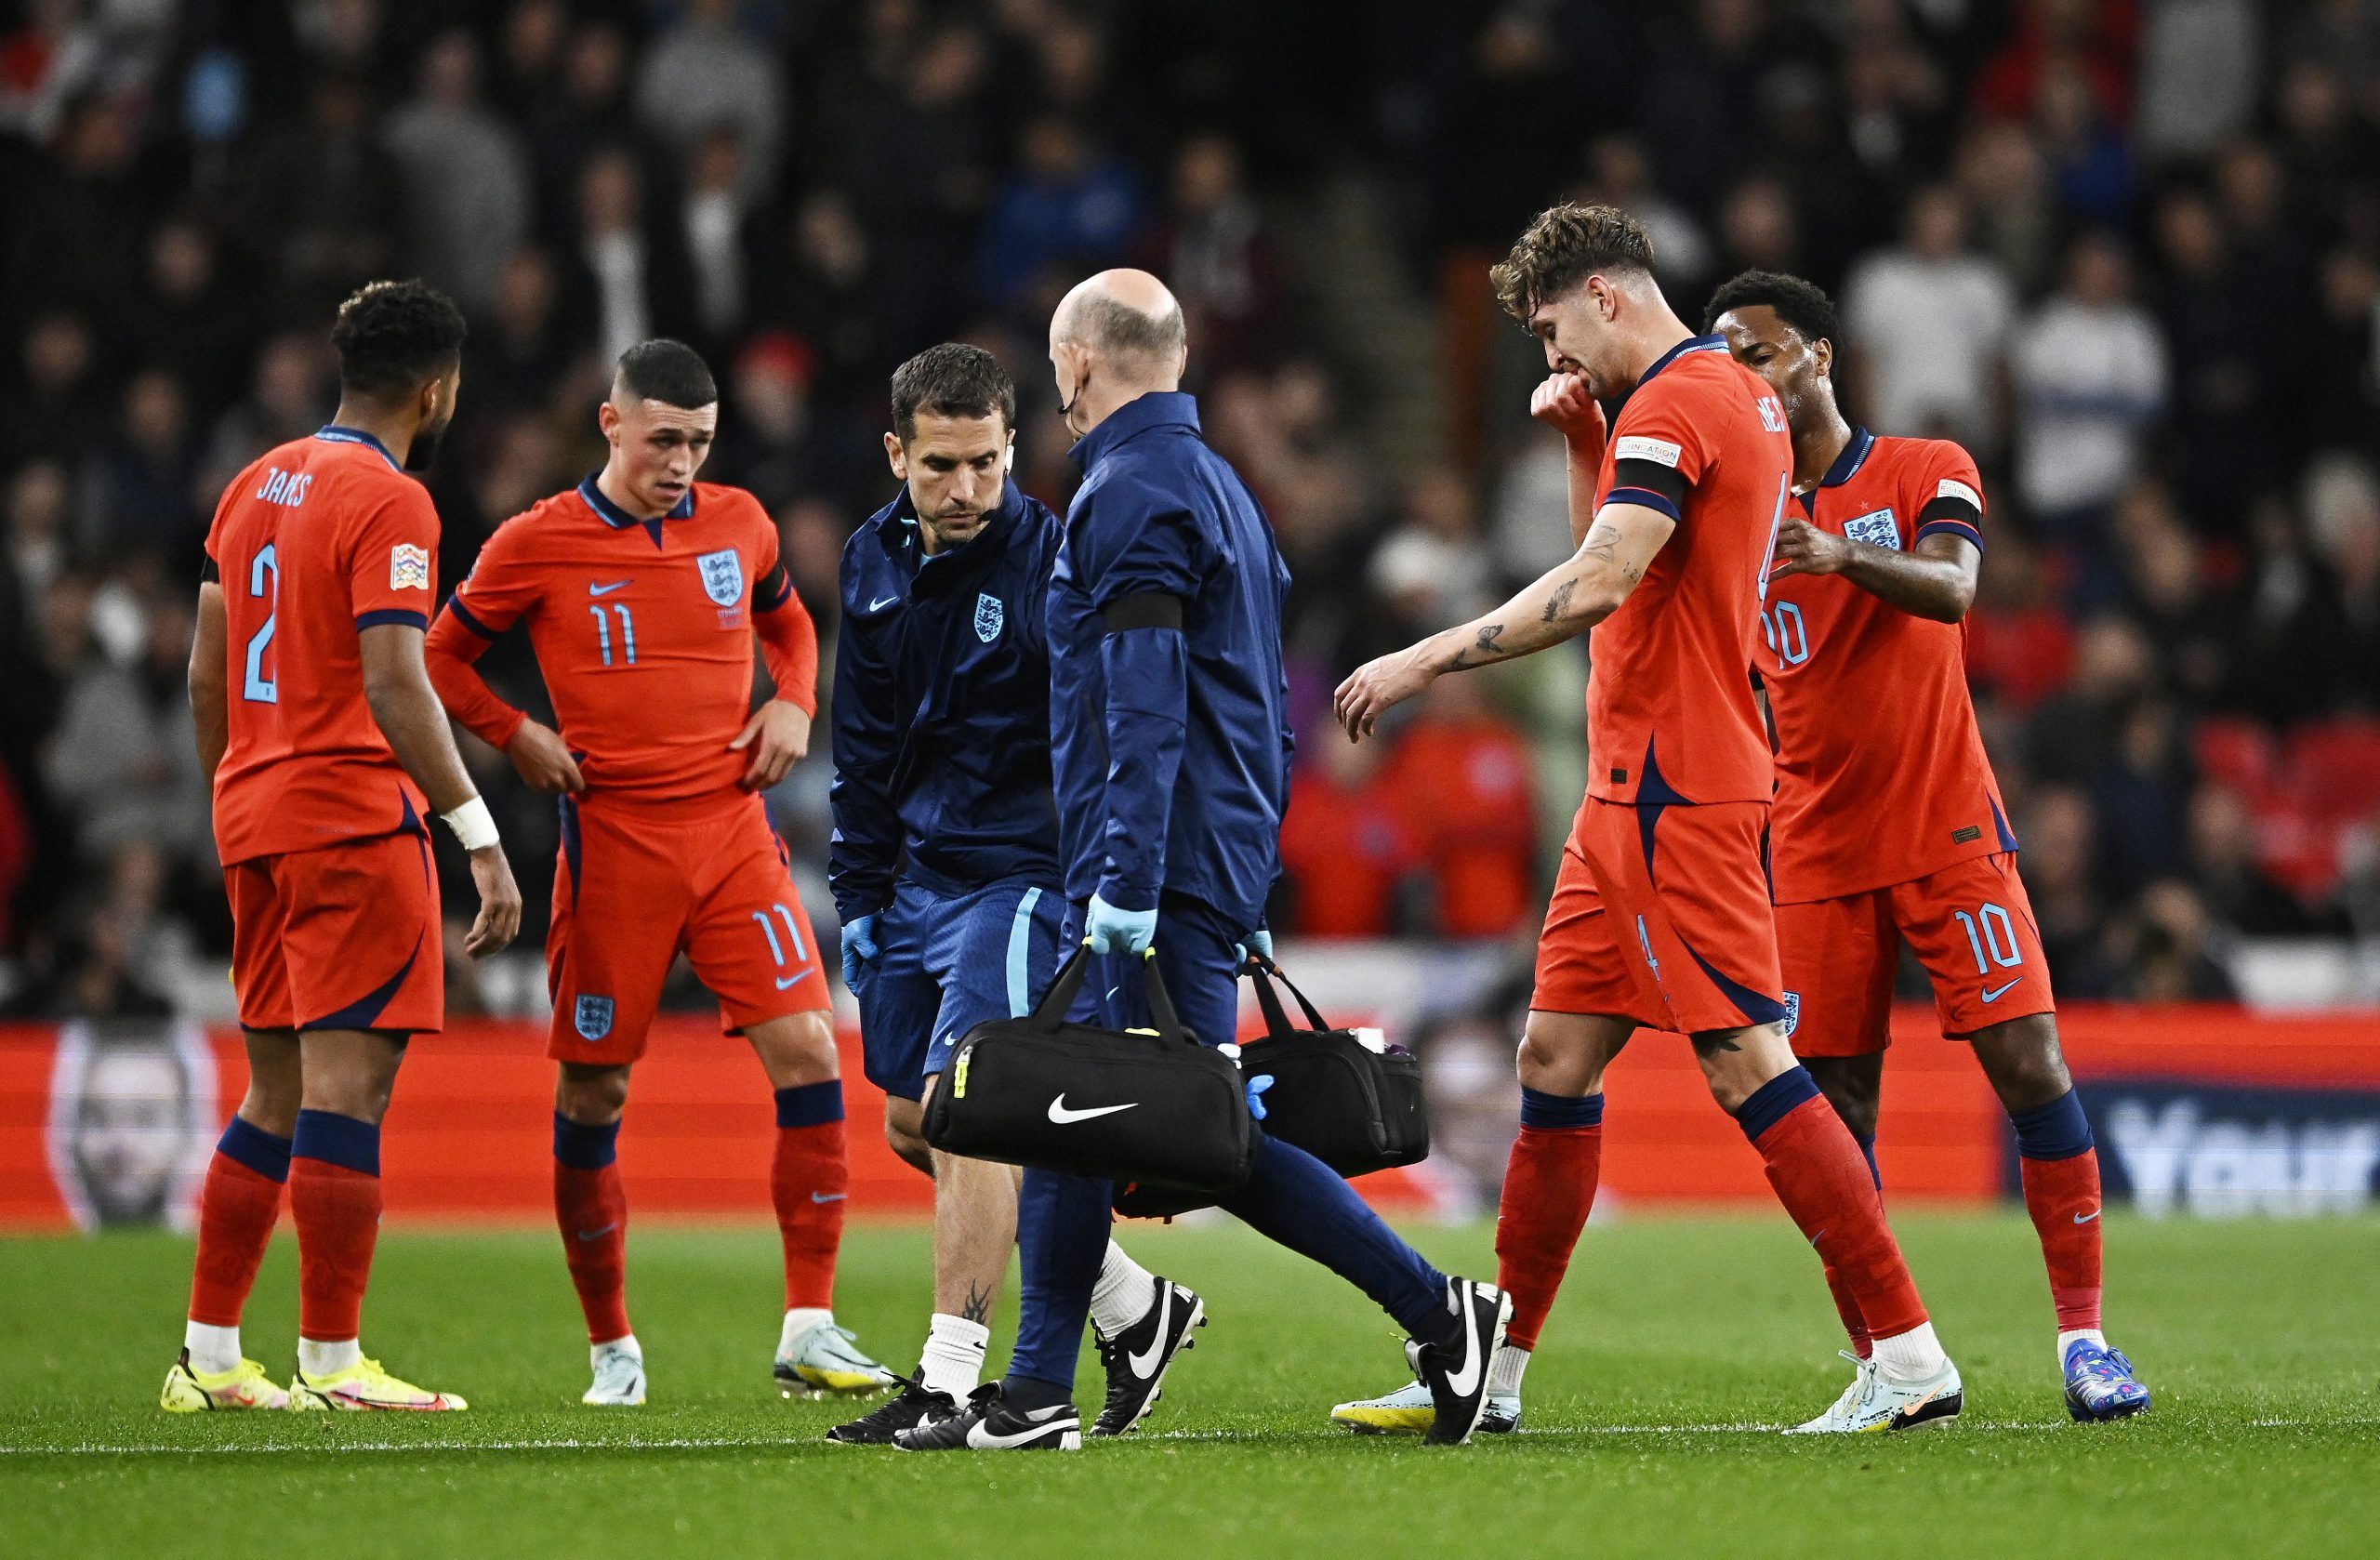 Soccer Football - UEFA Nations League - Group C - England v Germany - Wembley Stadium, London, Britain - September 26, 2022 England's John Stones walks off to substituted after sustaining an injury REUTERS/Tony Obrien